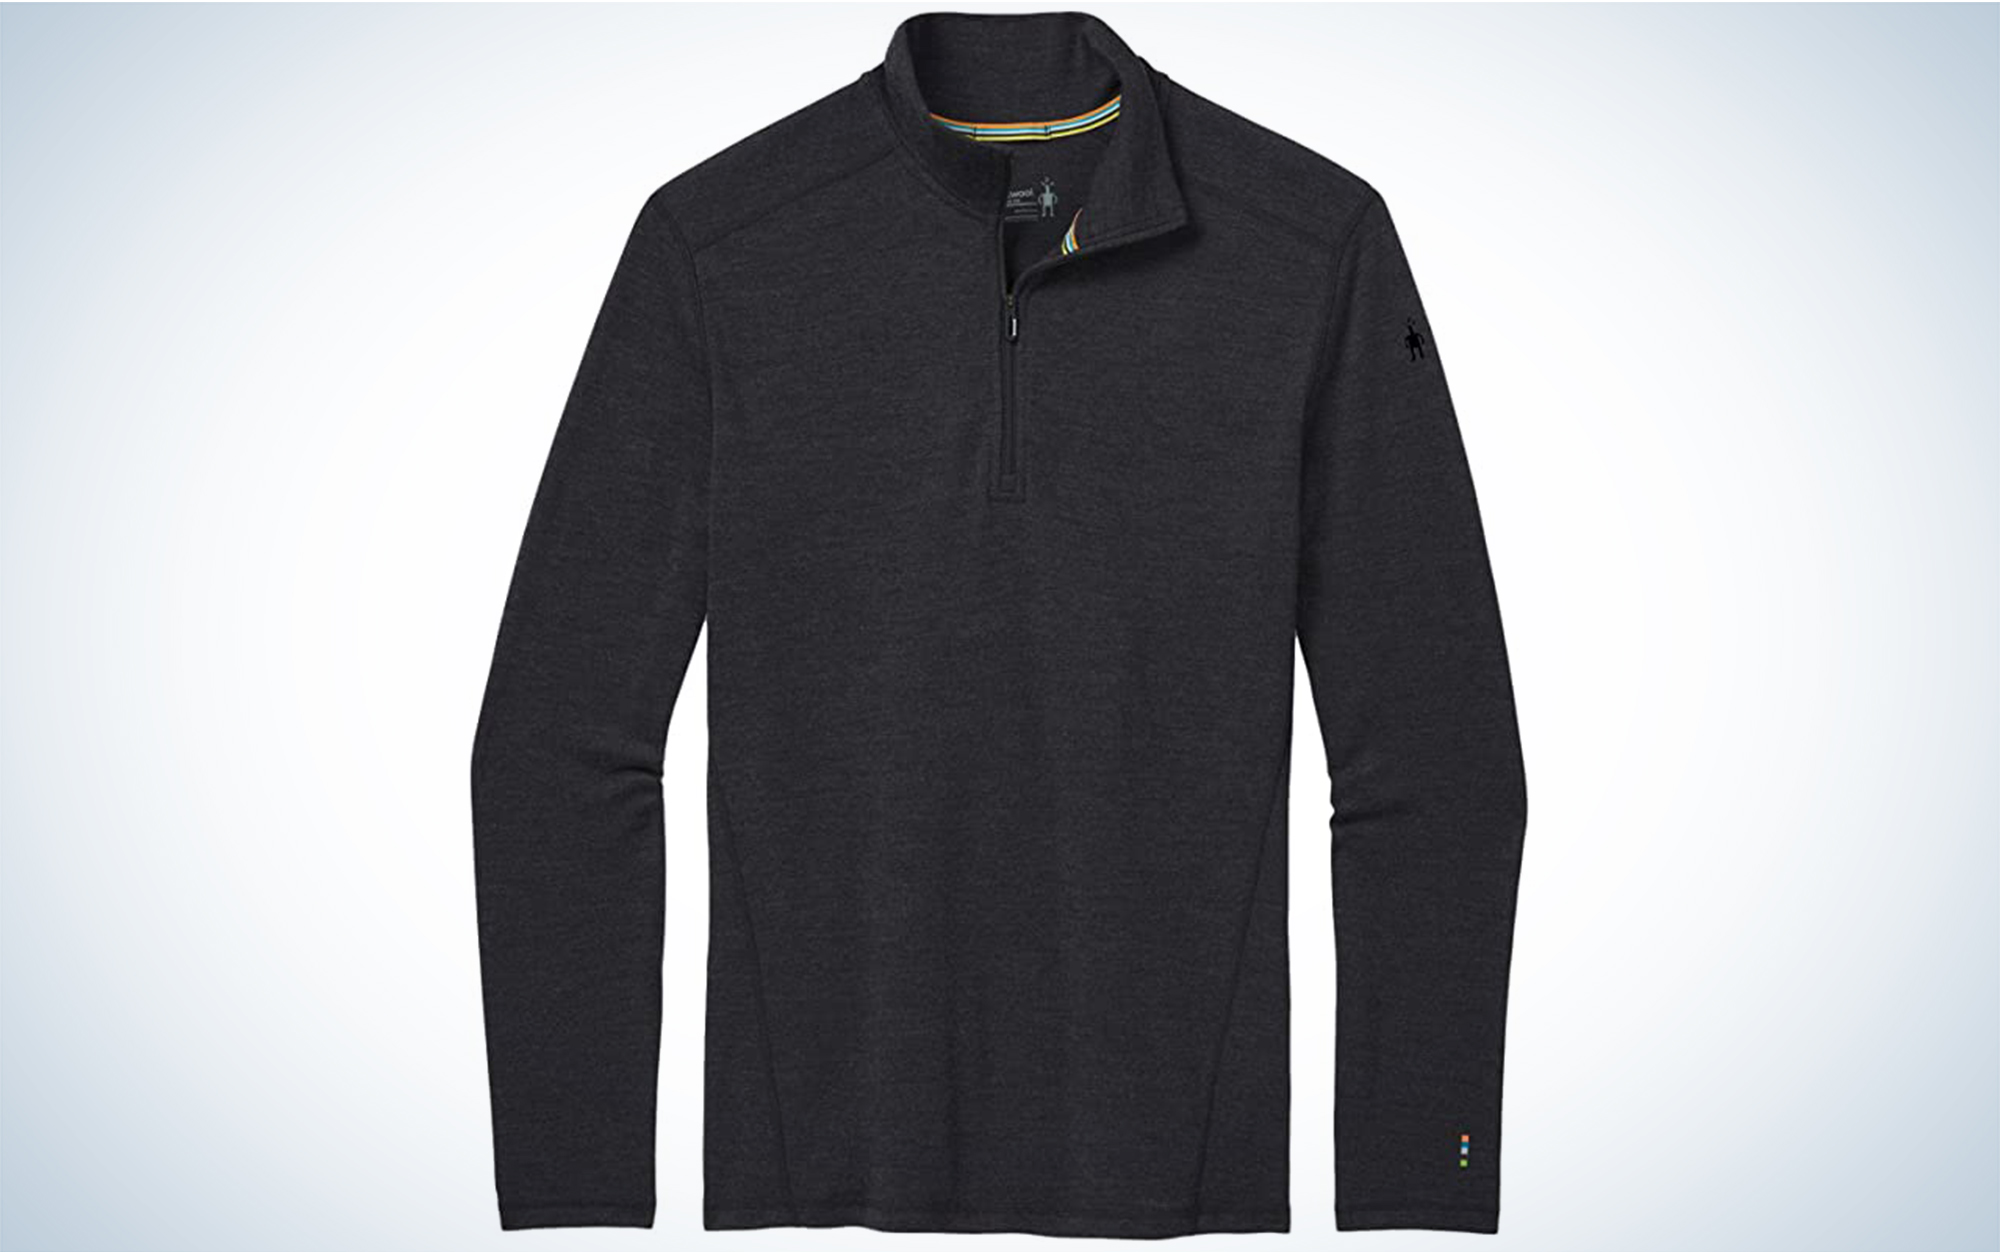 The Smartwool Thermal Merino Baselayer 1/4 Zip is the best baselayer for hiking.